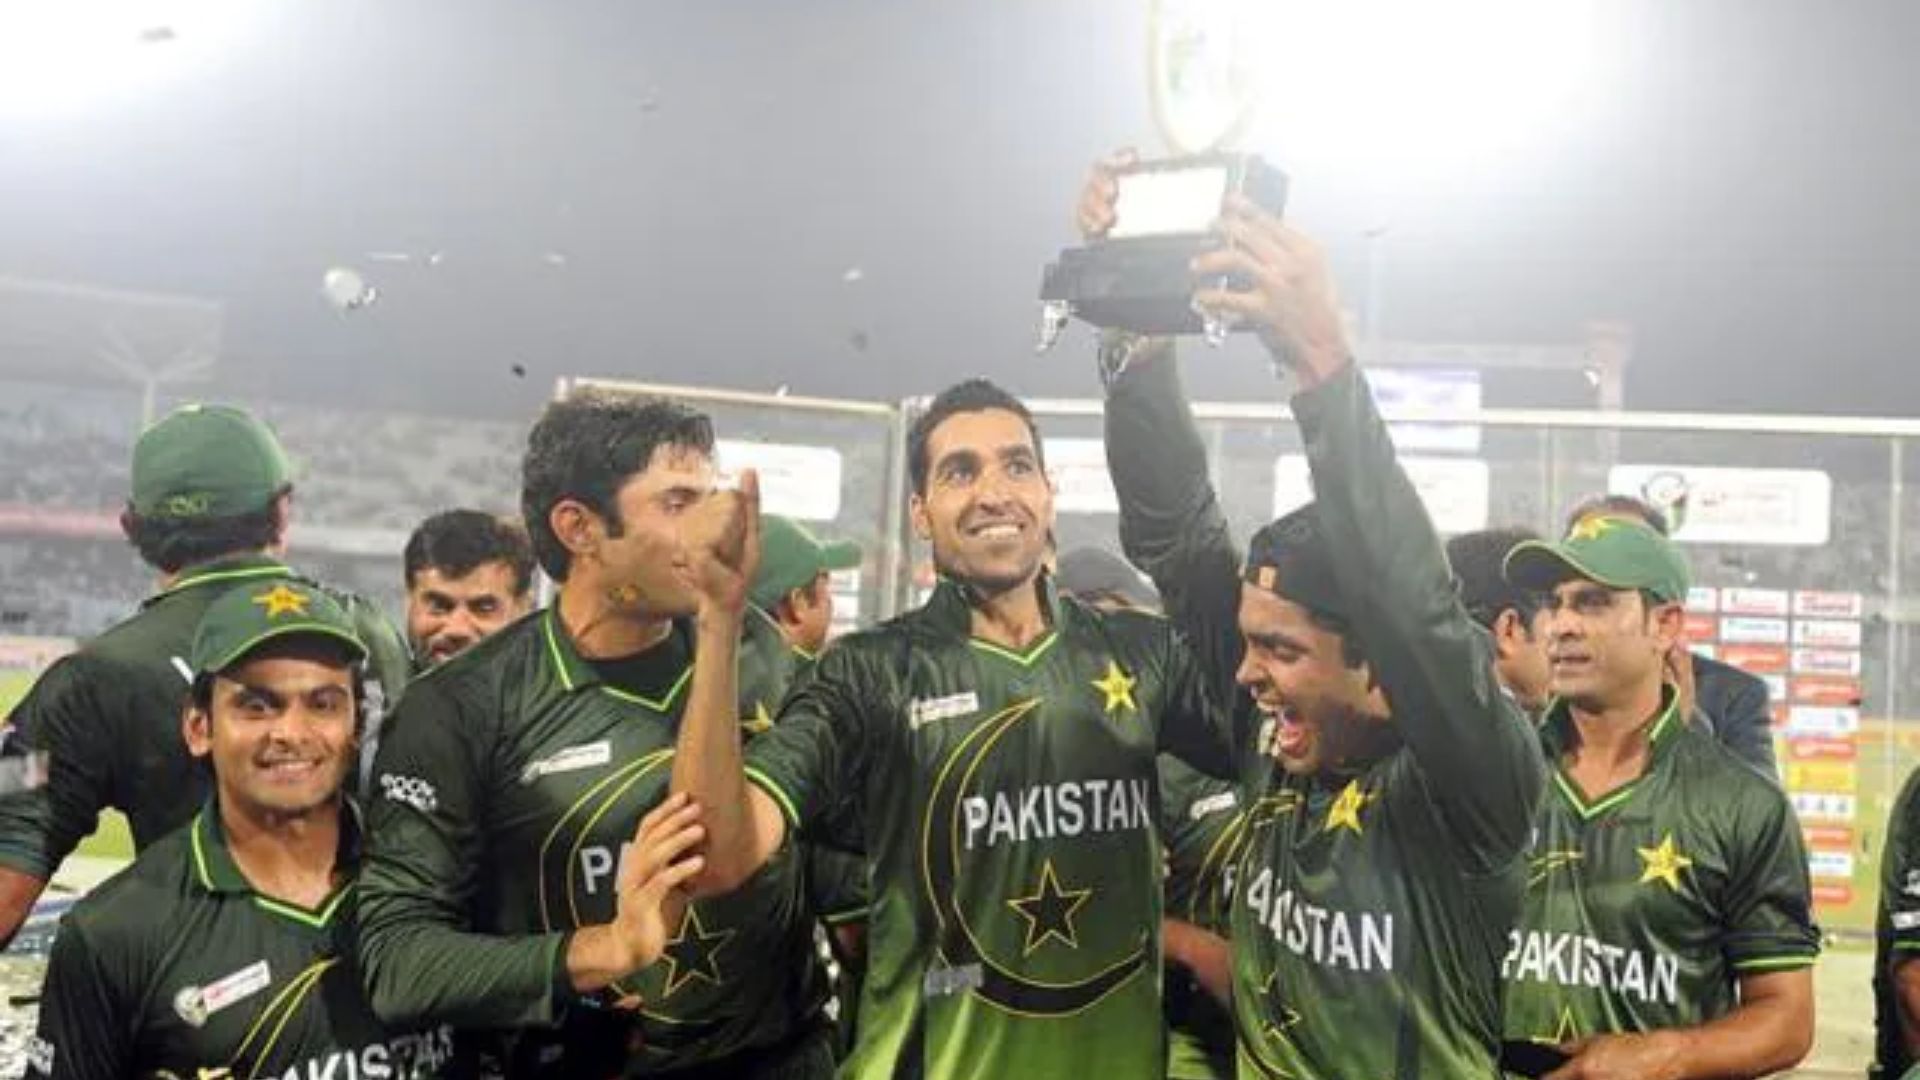 Pakistan won their 2nd Asia Cup title after a humdinger of a Final against Bangladesh.